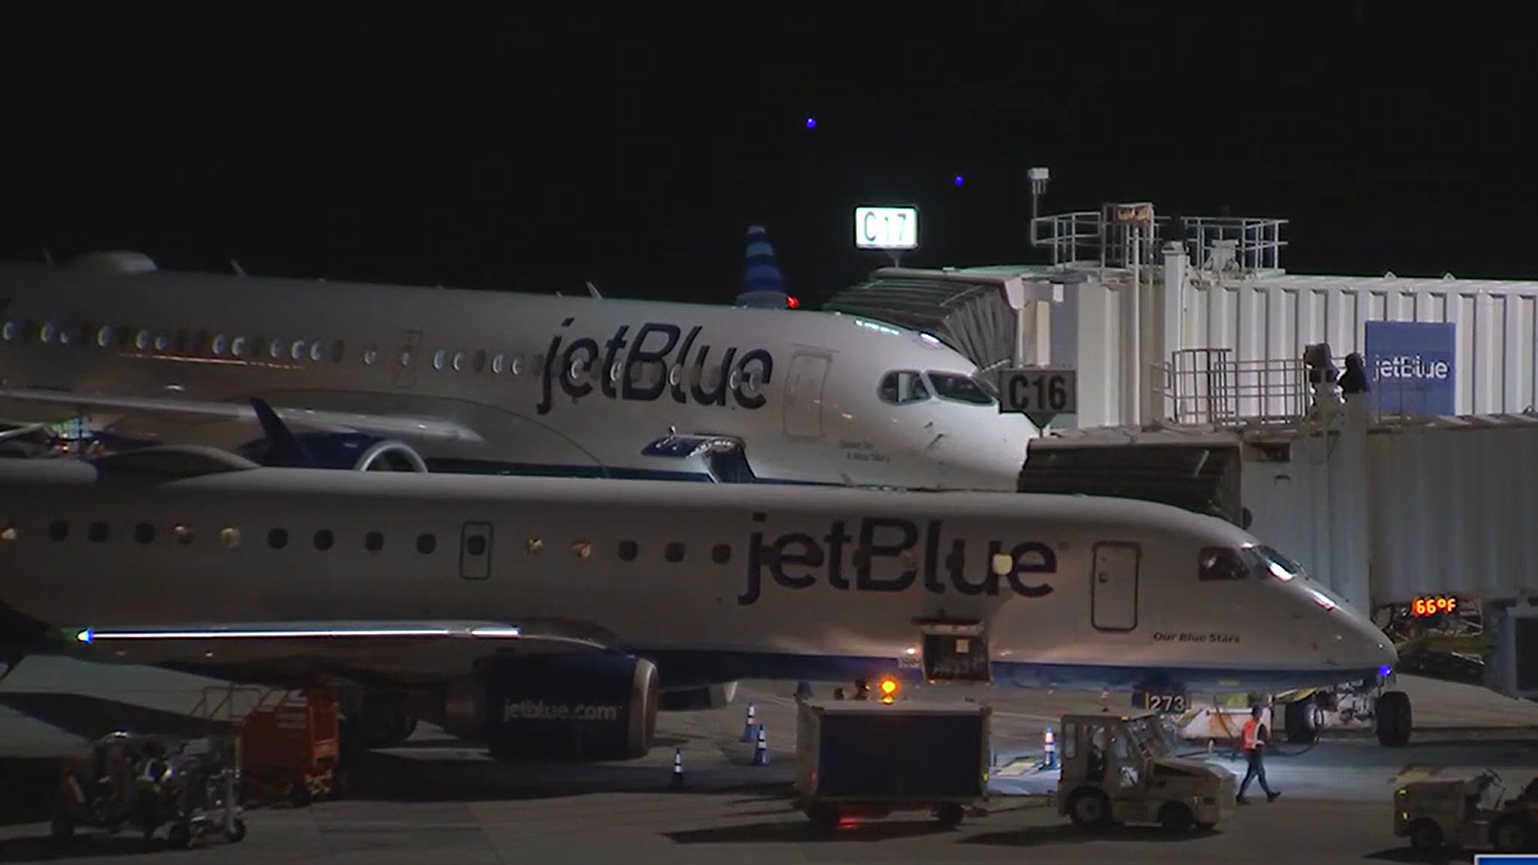 The FAA is investigating what happened to the two JetBlue flights